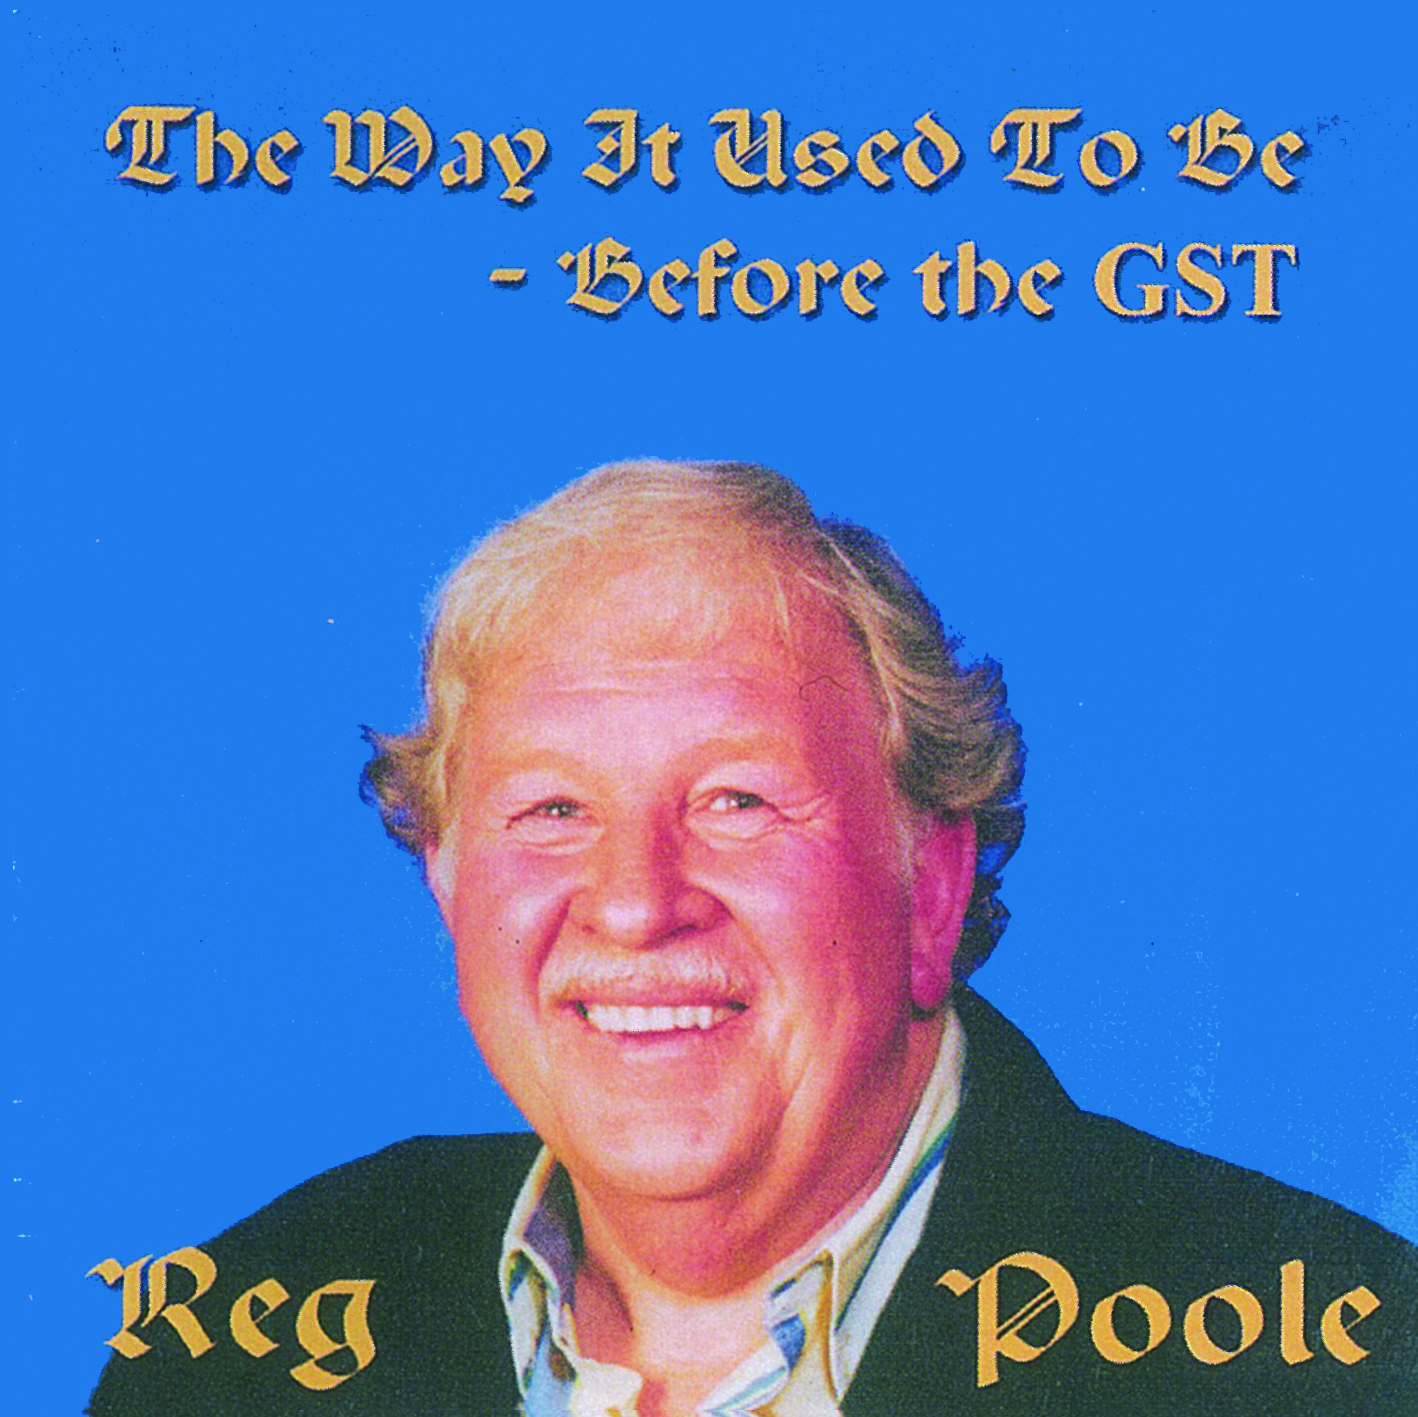 REG POOLE - THE WAY IT USED TO BE – BEFORE THE GST